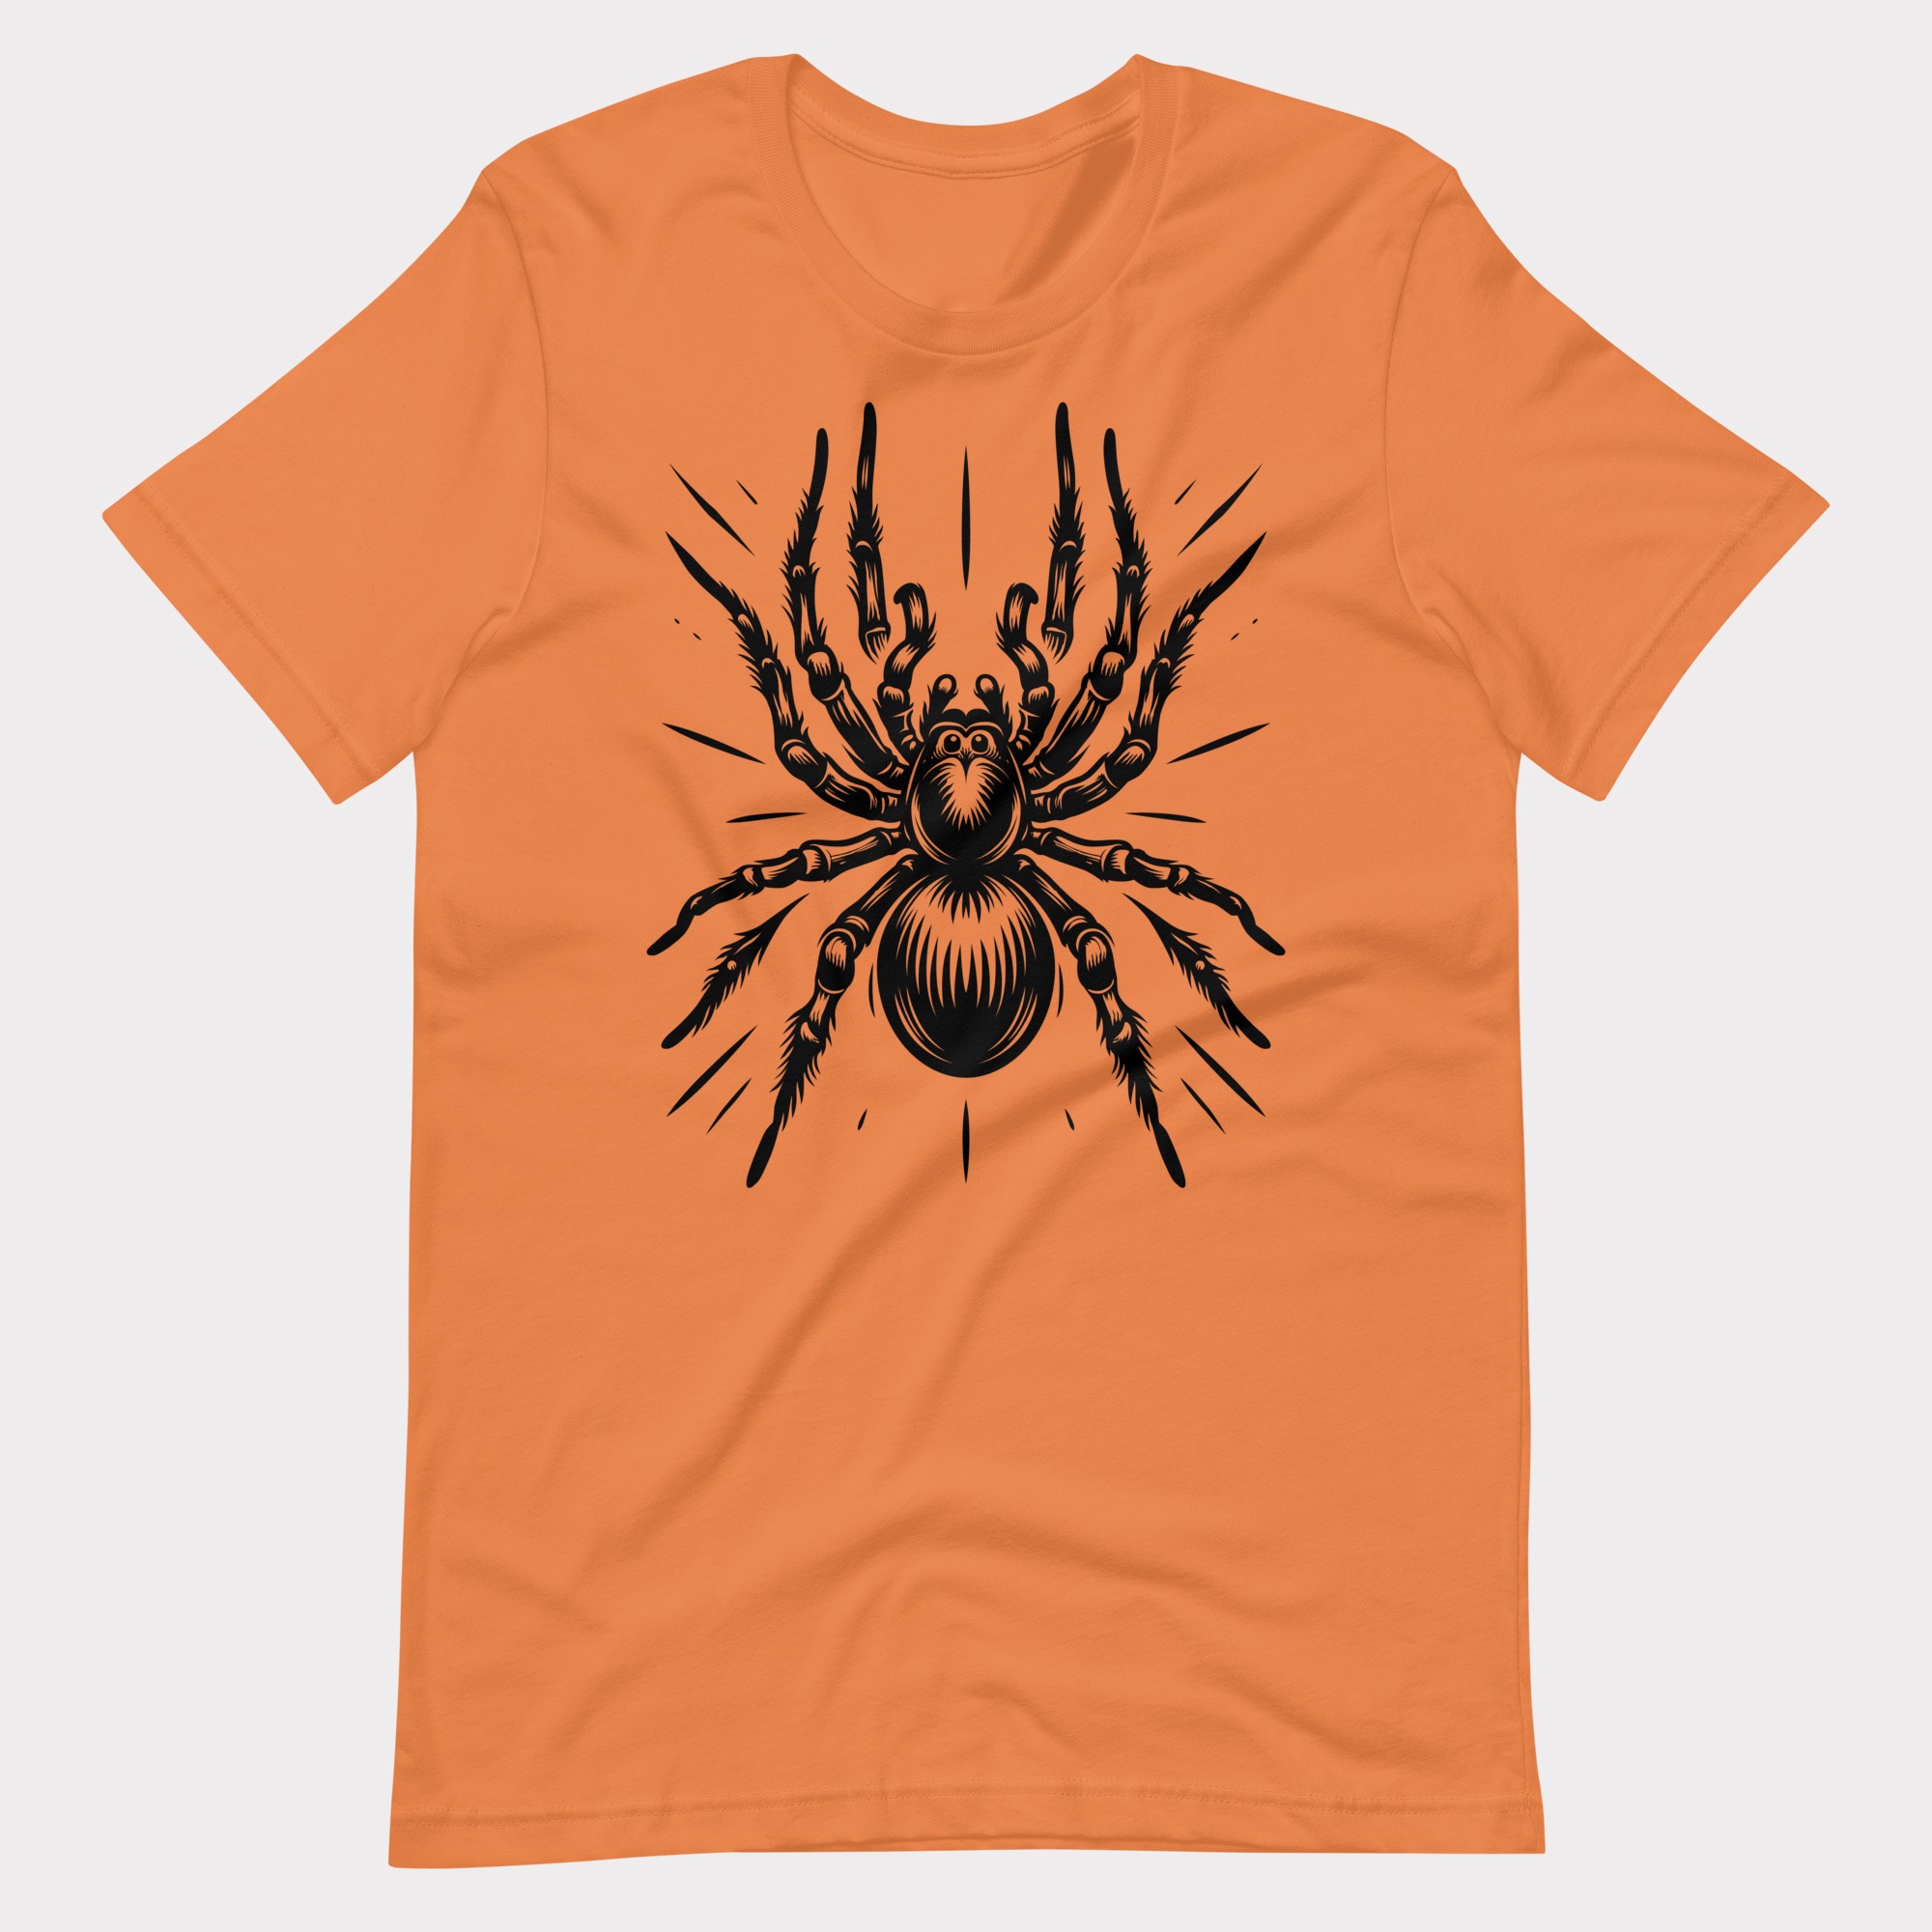 The burnt orange tee printed with the giant spider